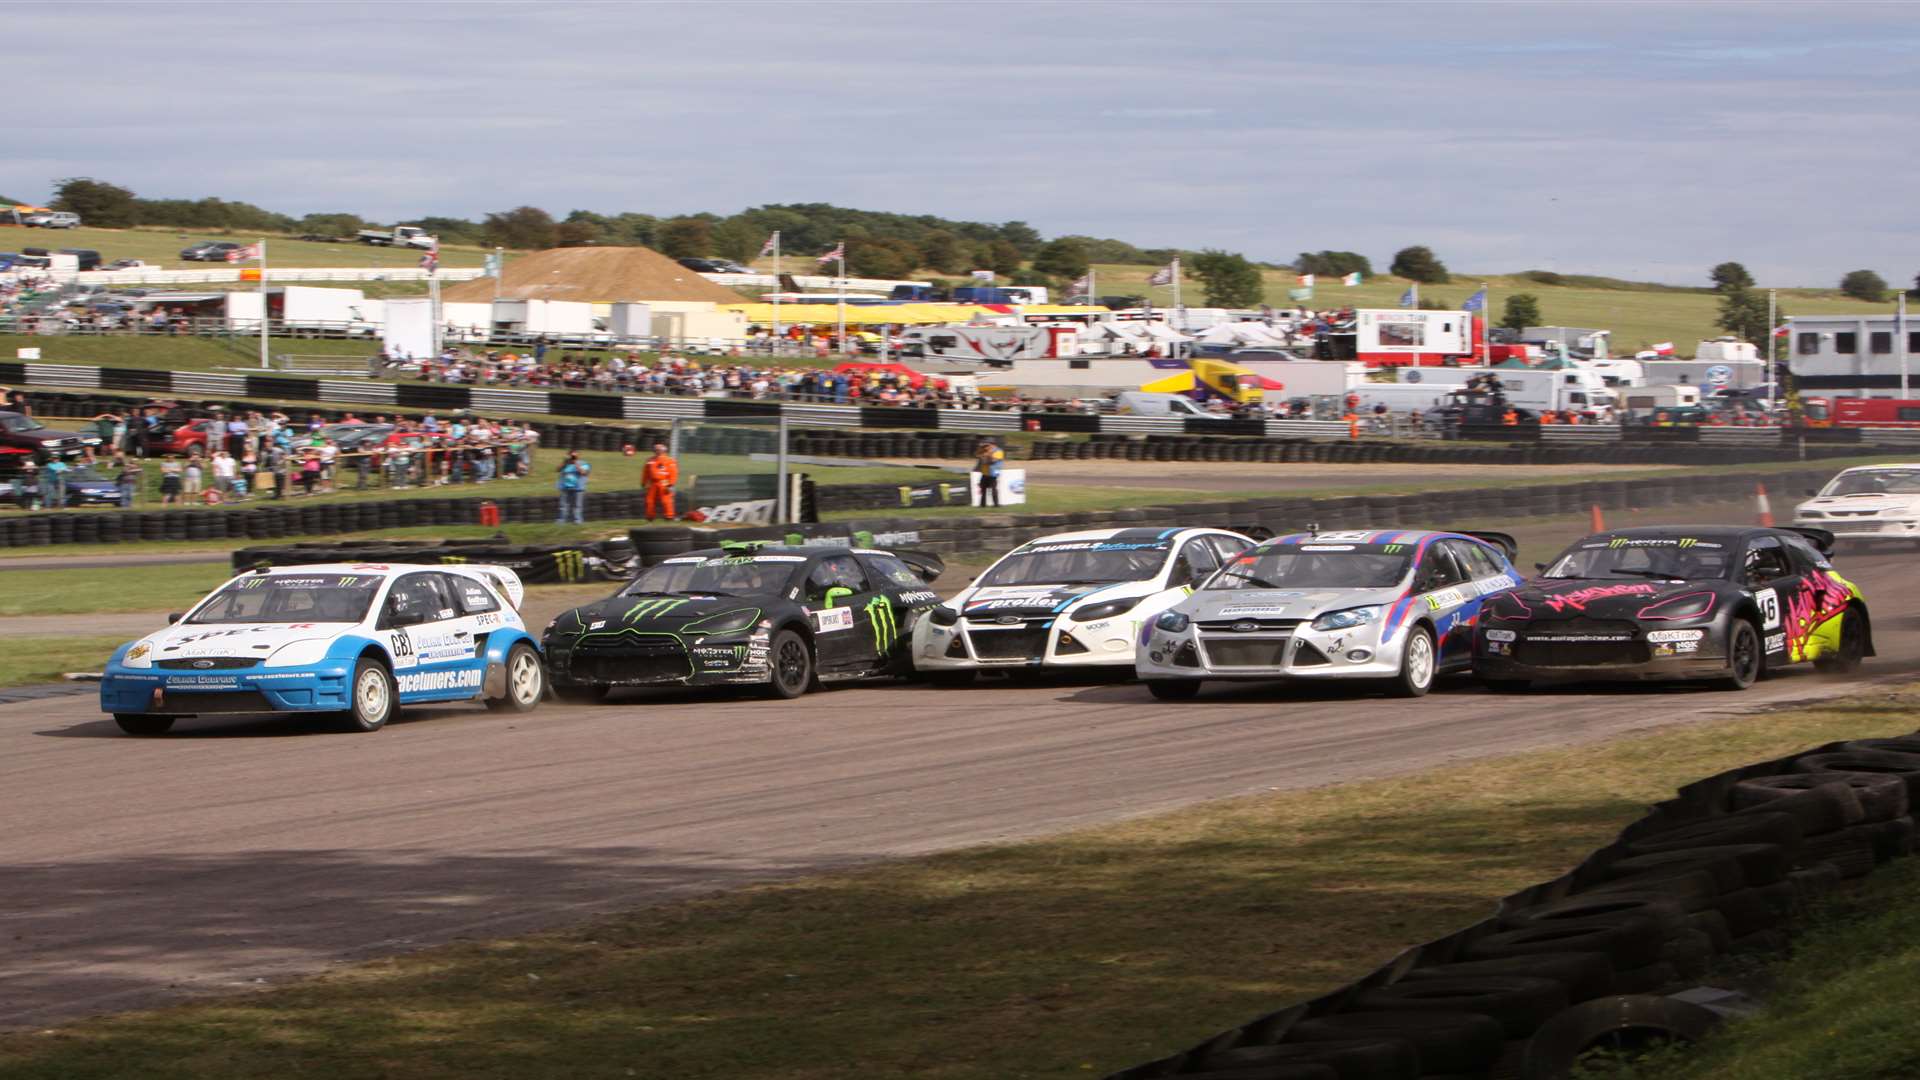 Bumper to bumper action at Lydden Hill